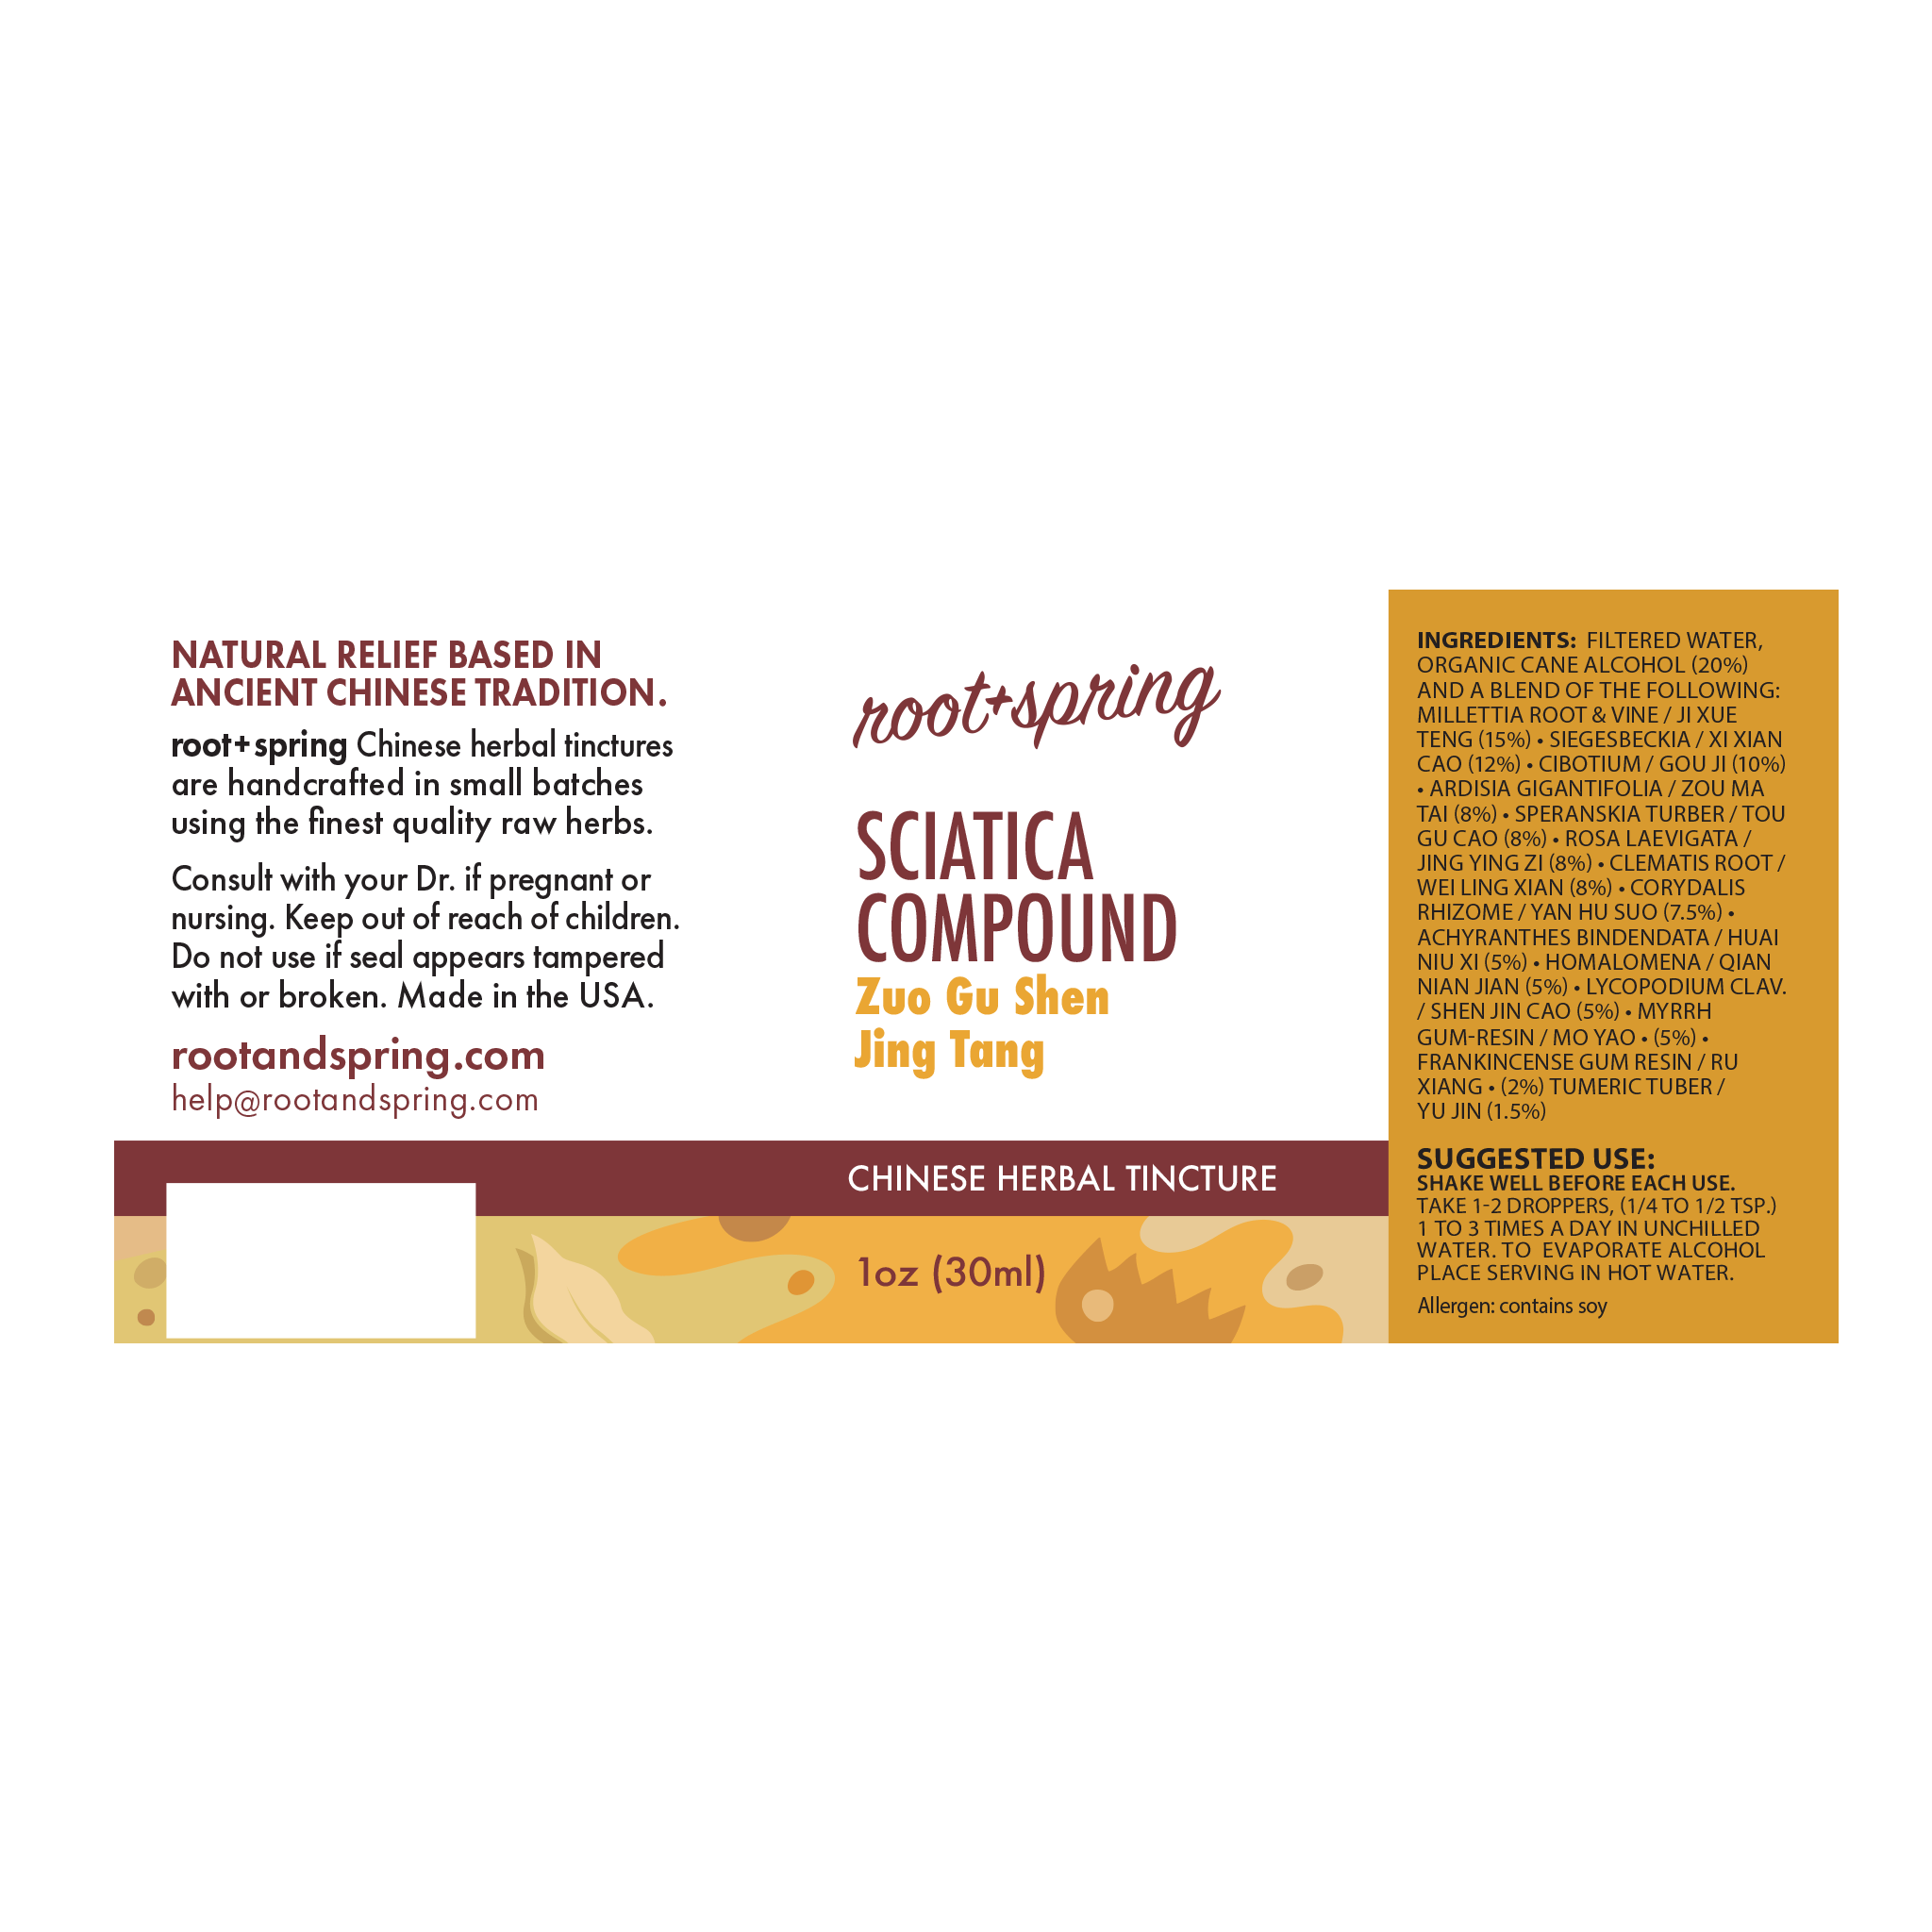 Label for Sciatica Compound (Zuo Gu Shen Jing Tang) - Herbal Tincture by root + spring